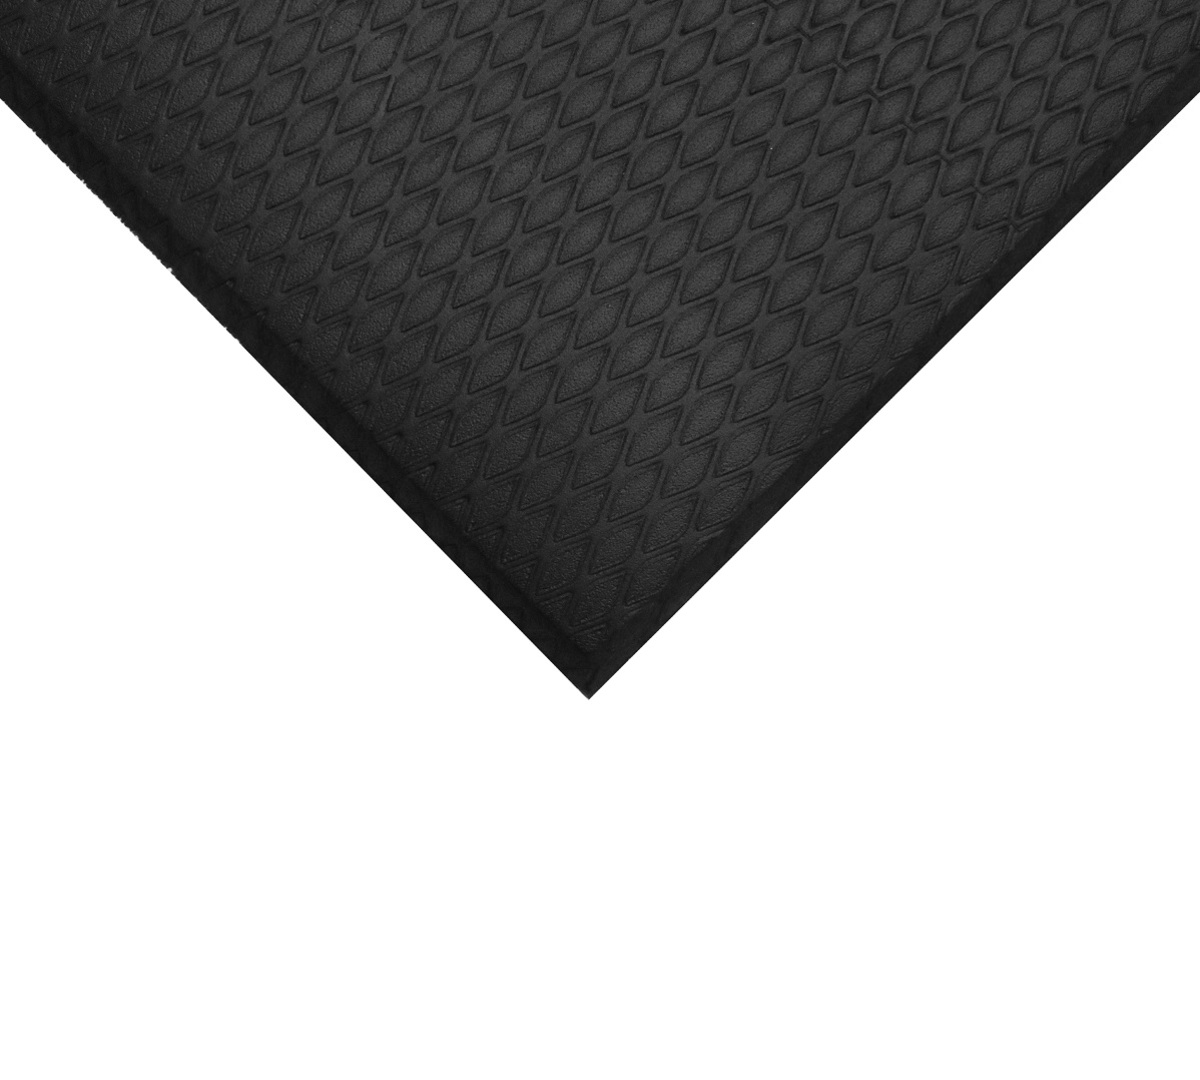 Anti-Fatigue Black Nitrile Rubber Mat 3x5 for Grease, Oil, Chemicals Shops